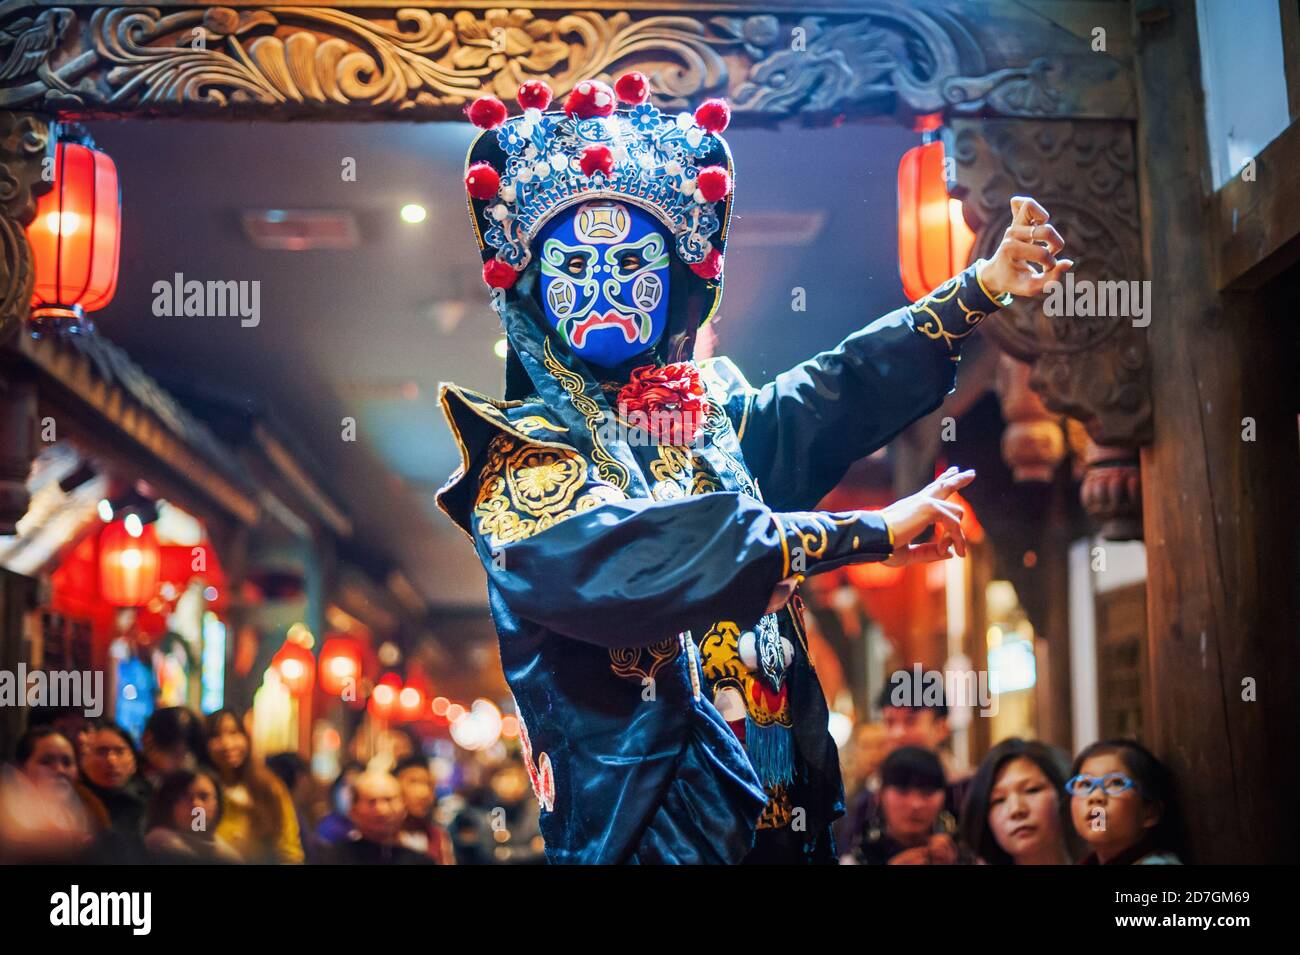 Chengdu, Sichuan Province, China - Jan 29, 2015: Chinese actor performs a public traditional face-changing art or bianlian on stage at Chunxifang Chunxilu covered street. Stock Photo